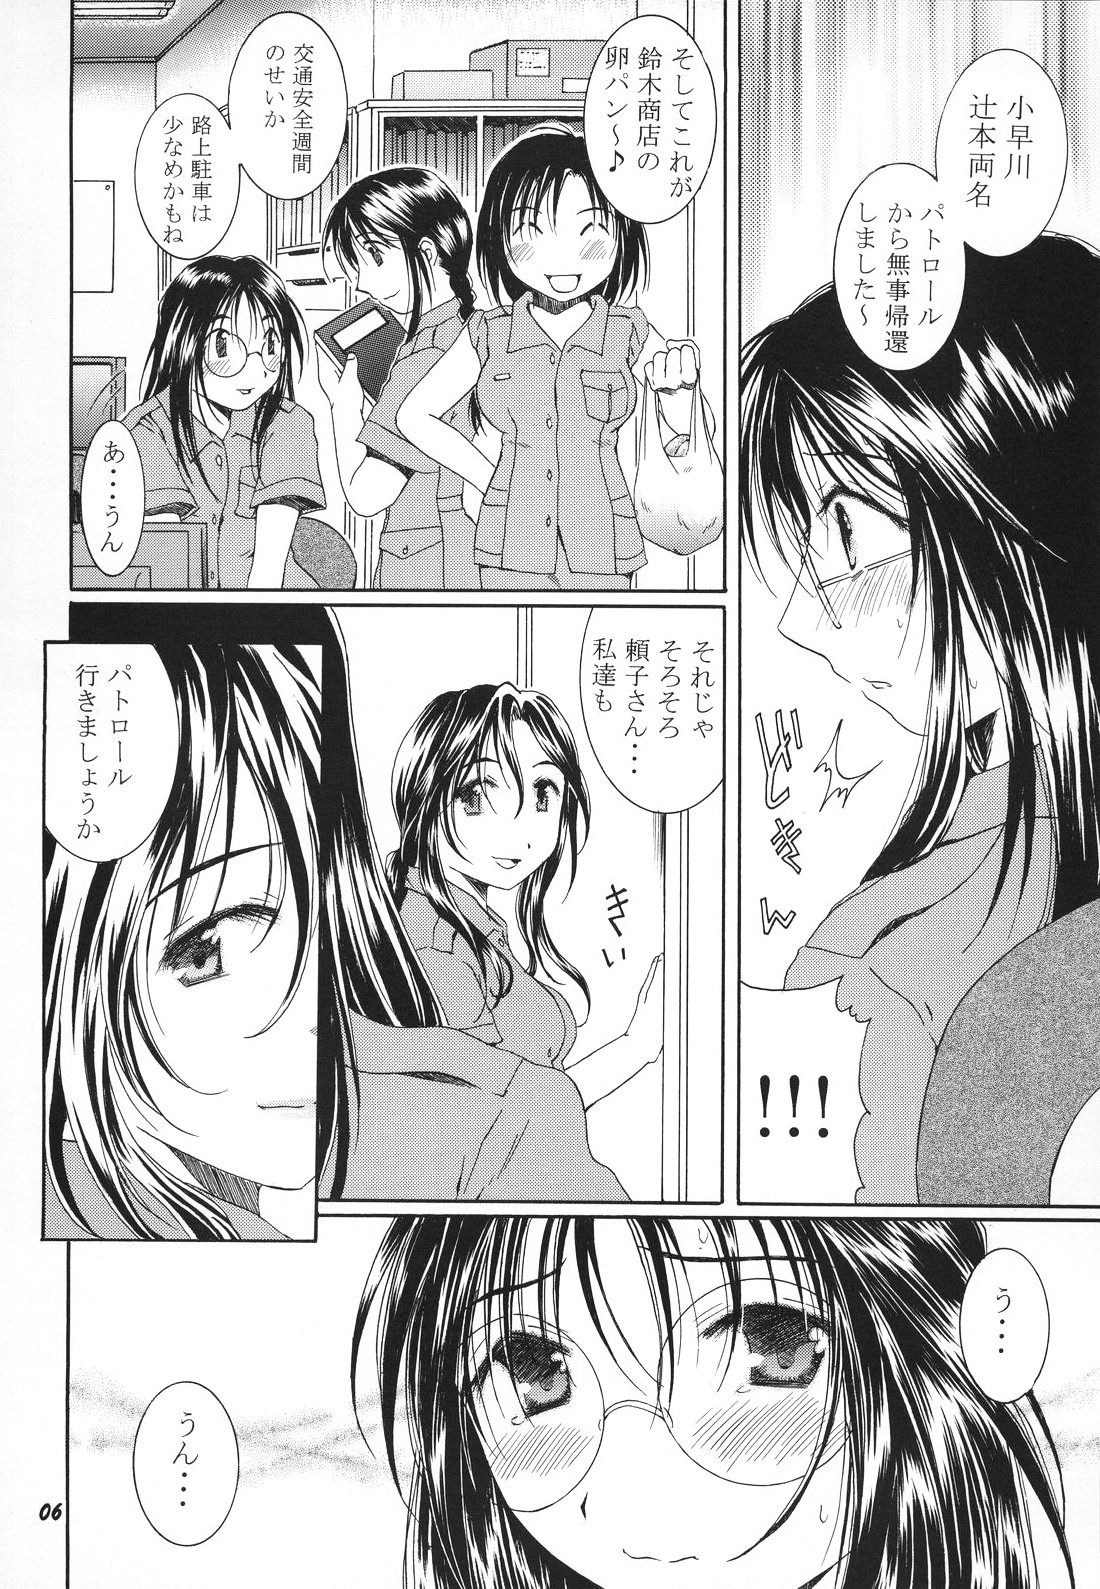 [Mechanical Code (Takahashi Kobato)] method to the madness 3 (You're Under Arrest!) page 5 full